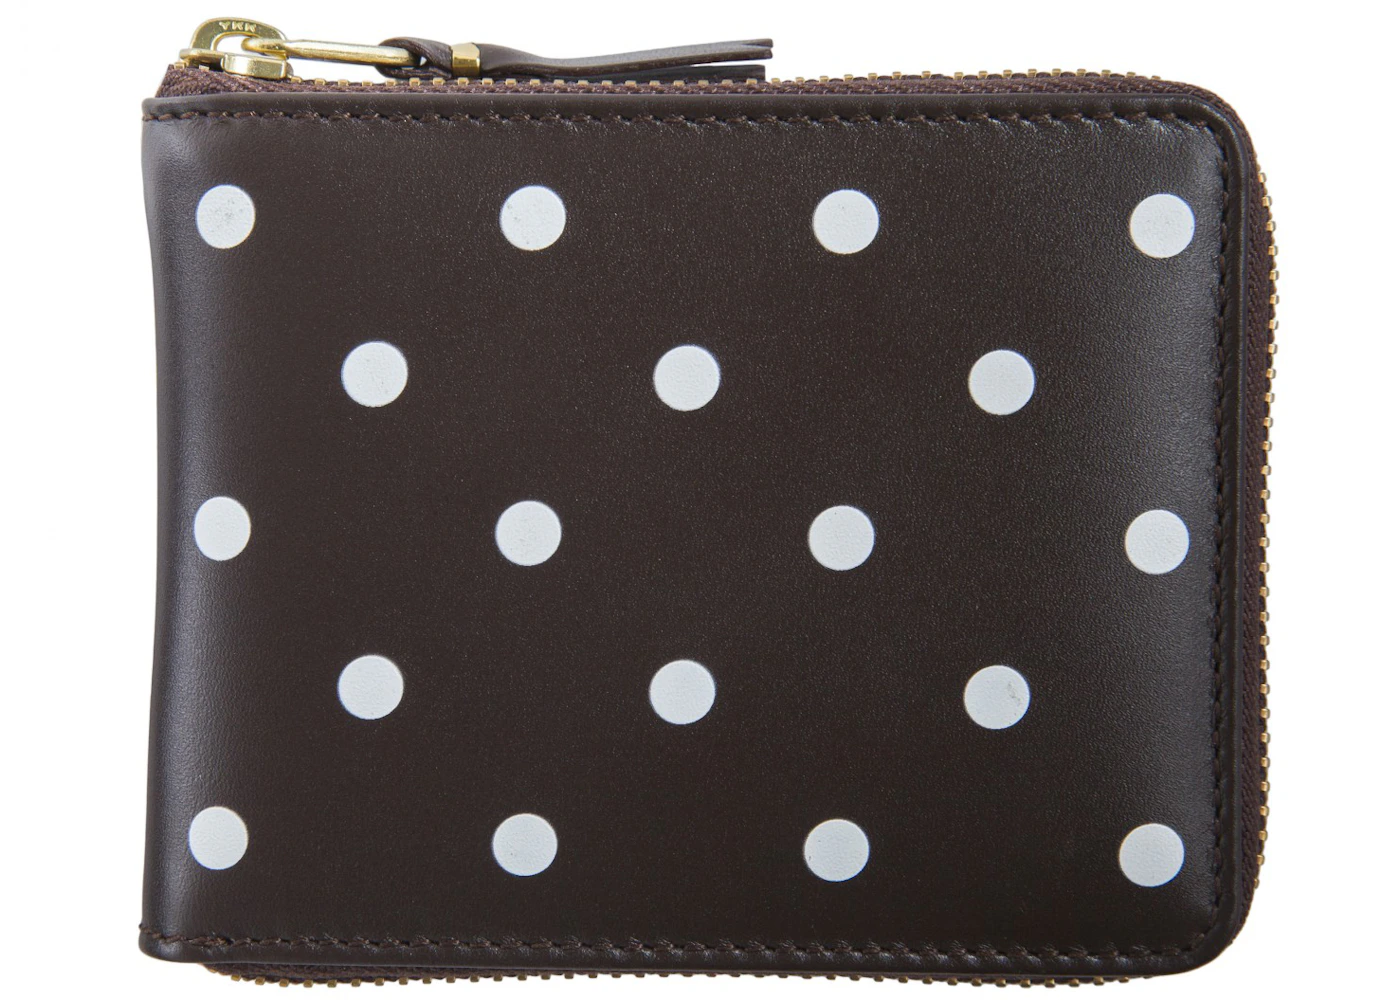 Comme des Garcons SA7100PD Wallet Polka Dots Brown in Leather with Gold ...